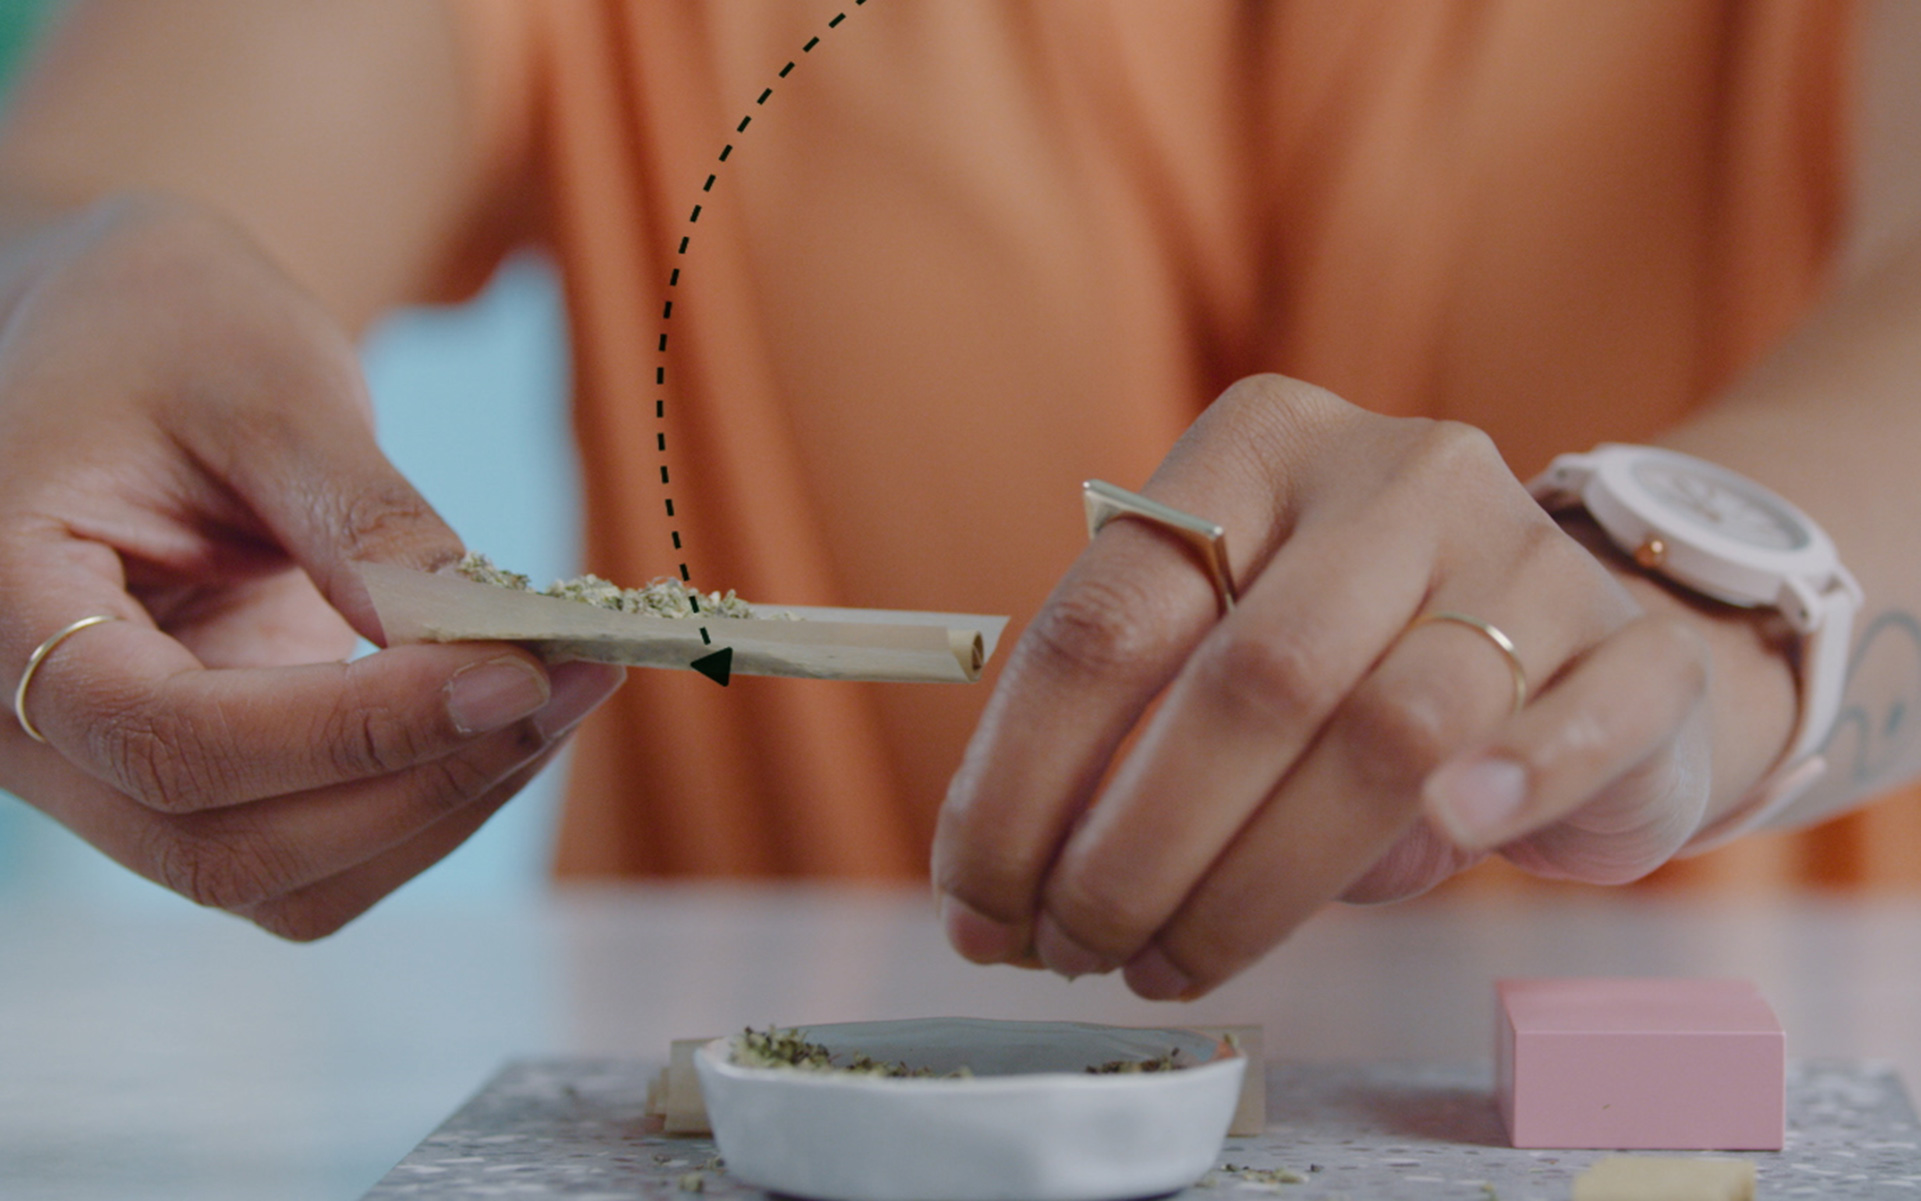 How to roll a joint: Step-by-step guide to rolling up weed | Leafly